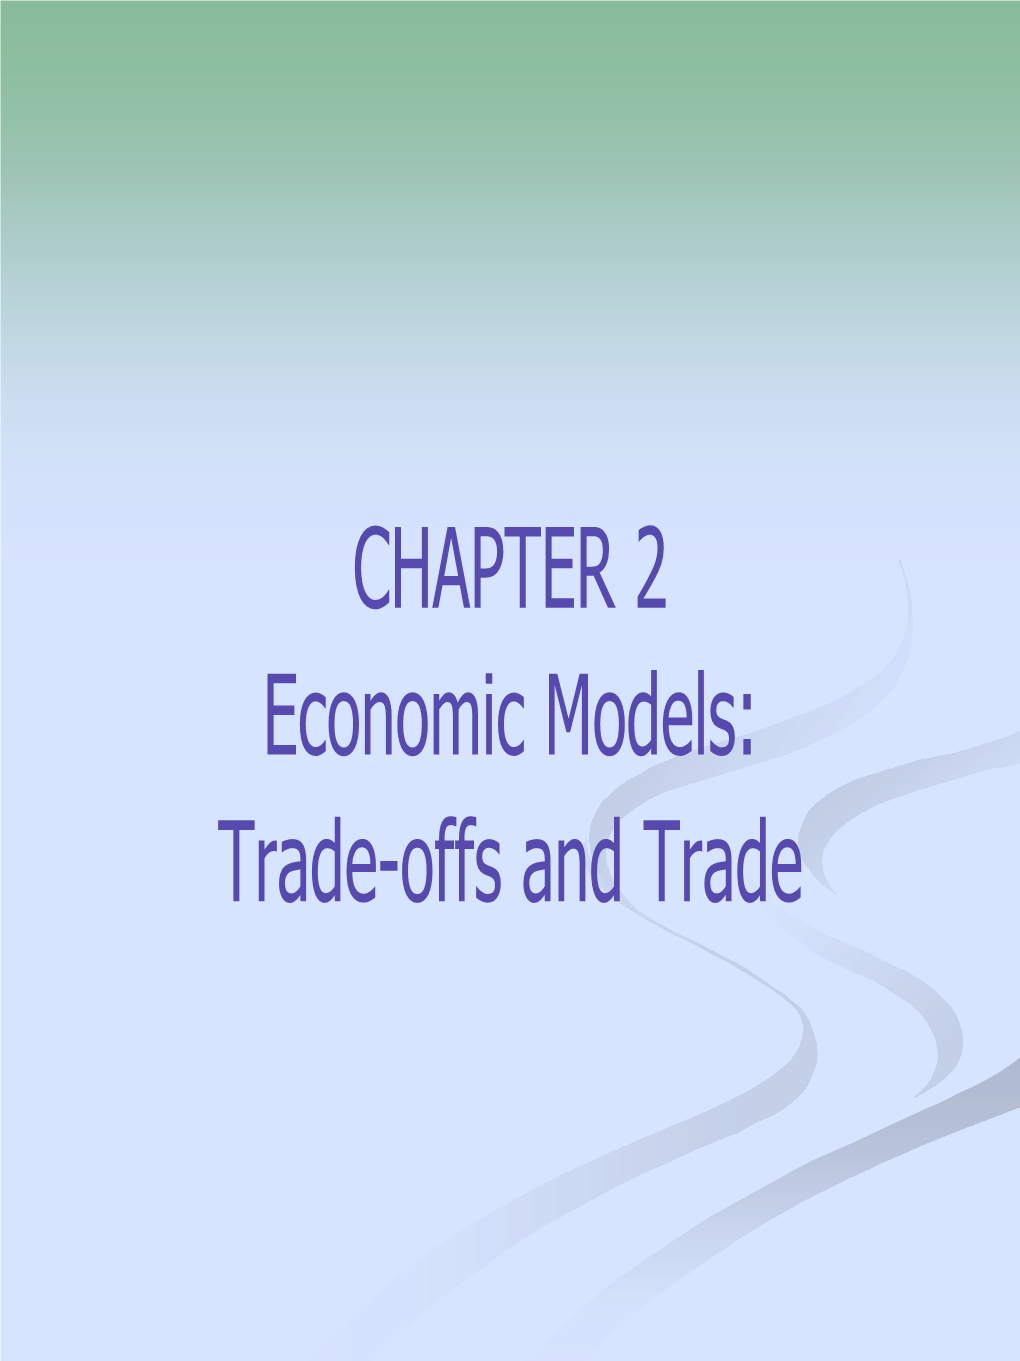 CHAPTER 2 Economic Models: Trade-Offs and Trade What You Will Learn in This Chapter